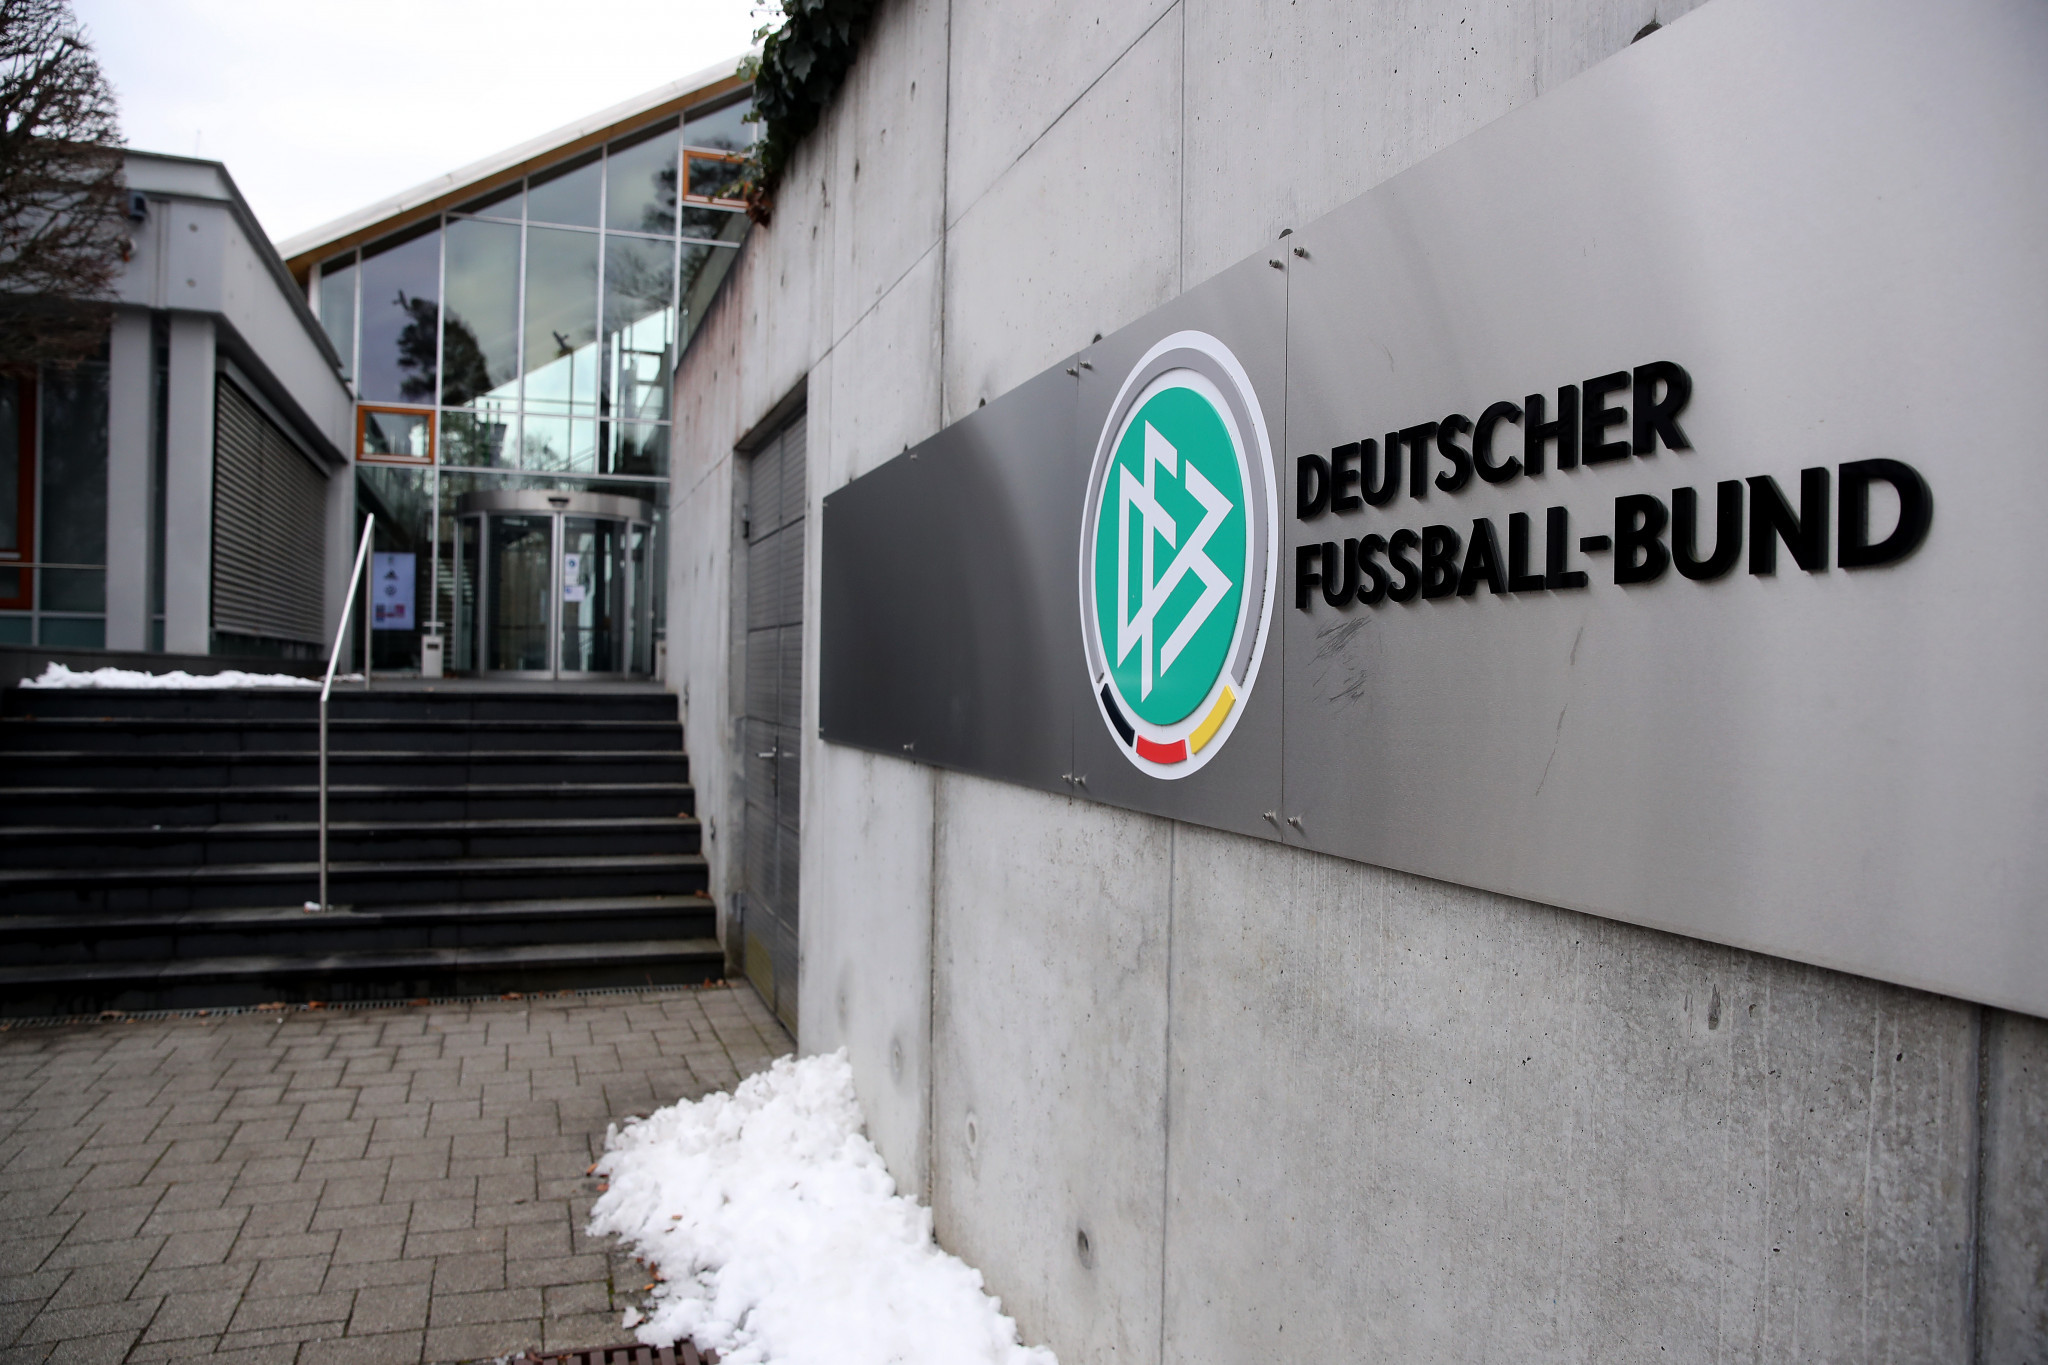 The heads of 26 German regional and state football associations backed a vote of no-confidence in Fritz Keller's leadership ©Getty Images